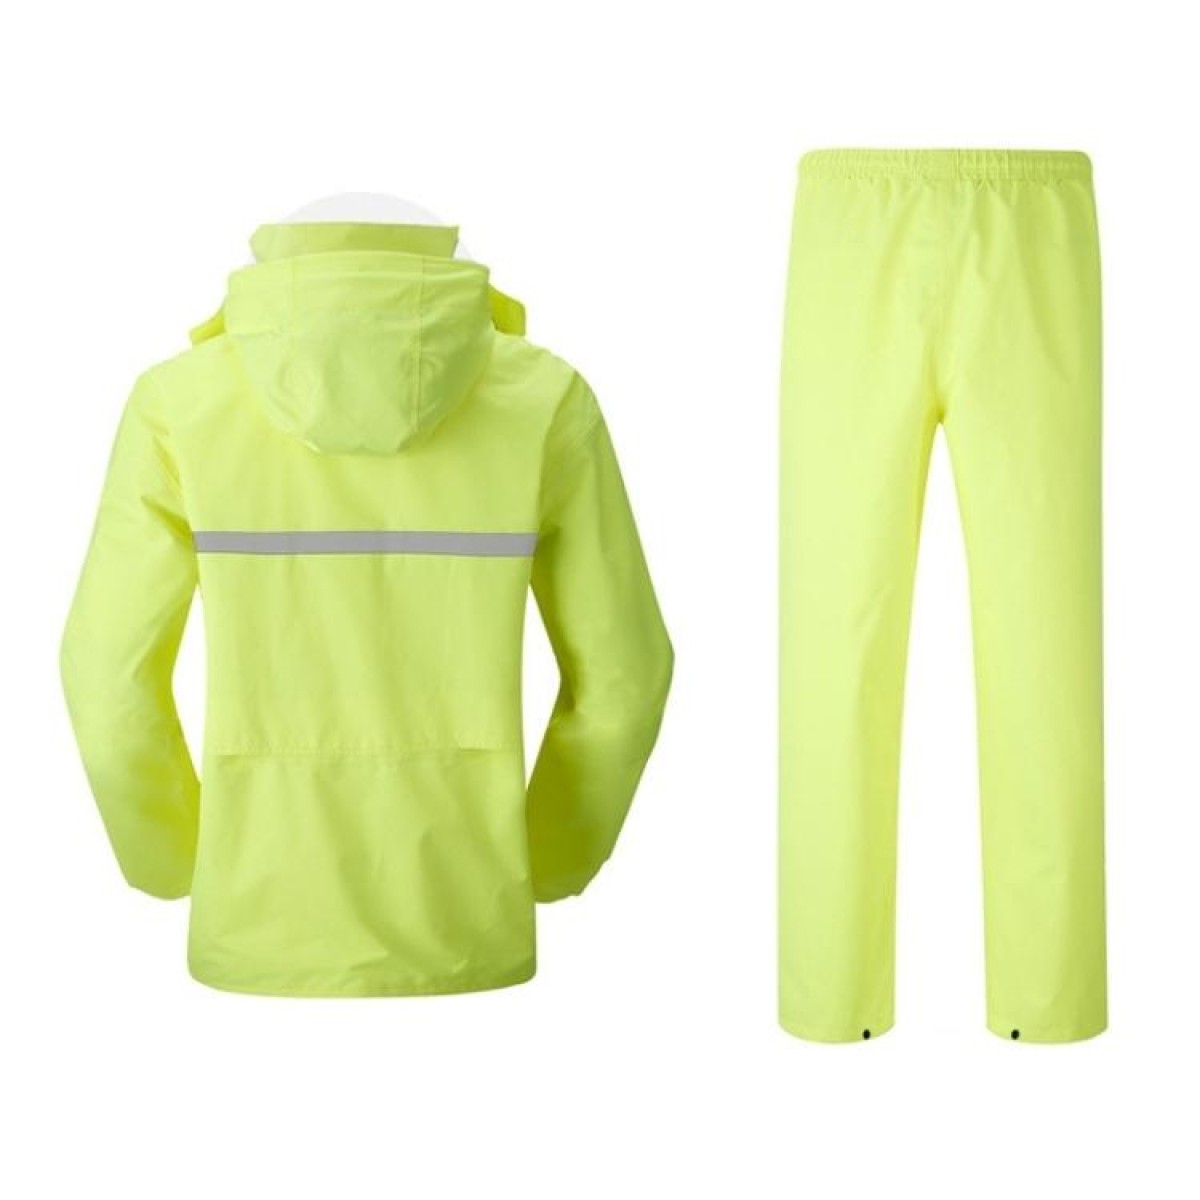 Durable Reflective Motorcycle Split Raincoat Pants Riding Bicycle Electric Bike Windproof Waterproof Rain Wear for Adult, Size: 4XL(Fluorescent Yellow)